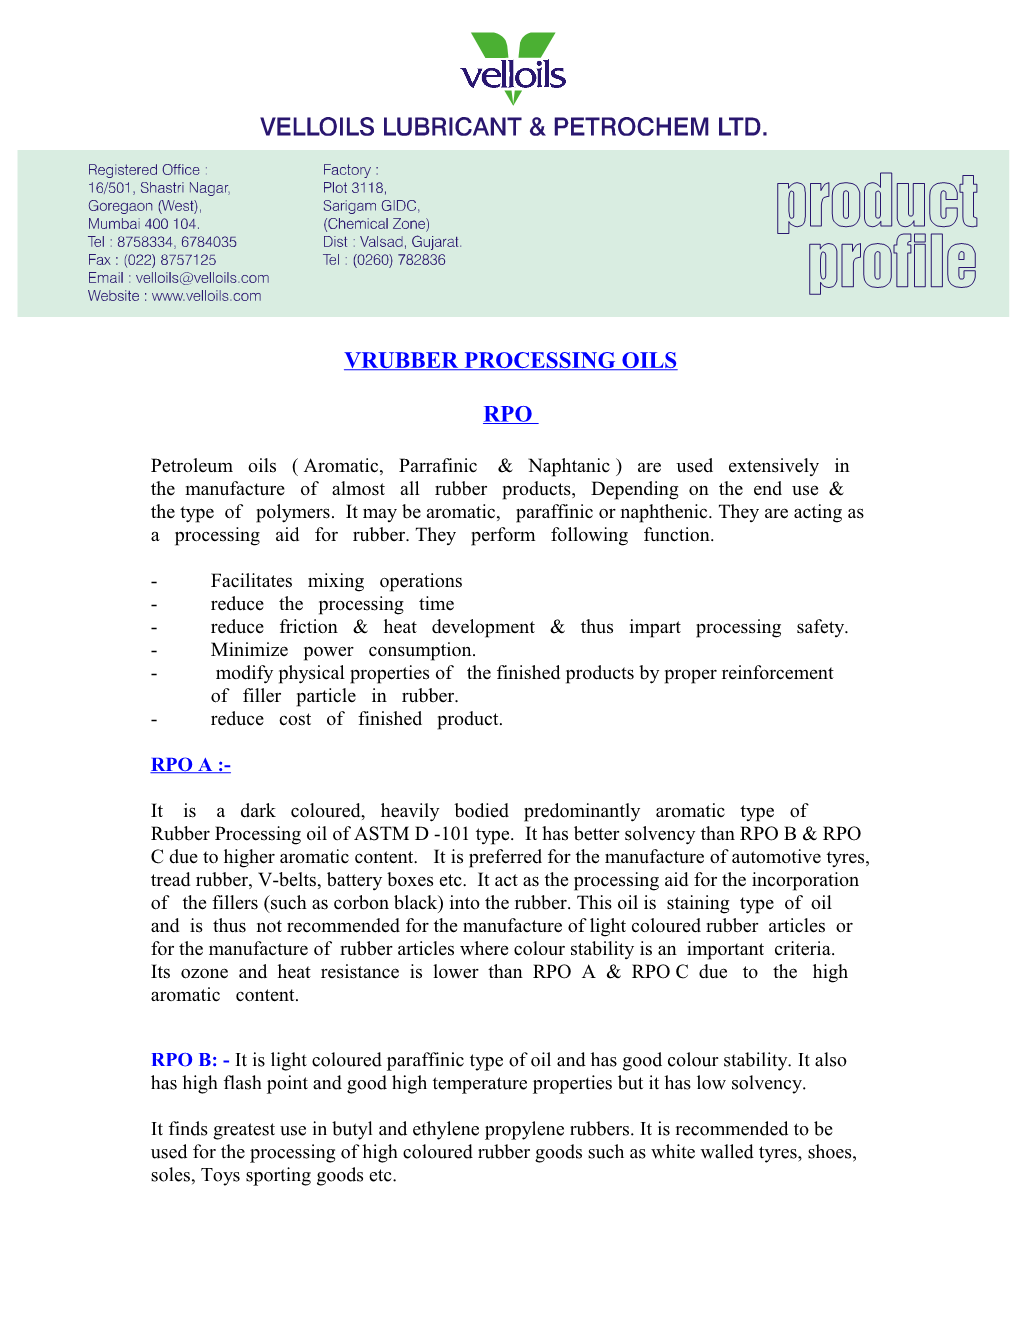 Vrubber Processing Oils